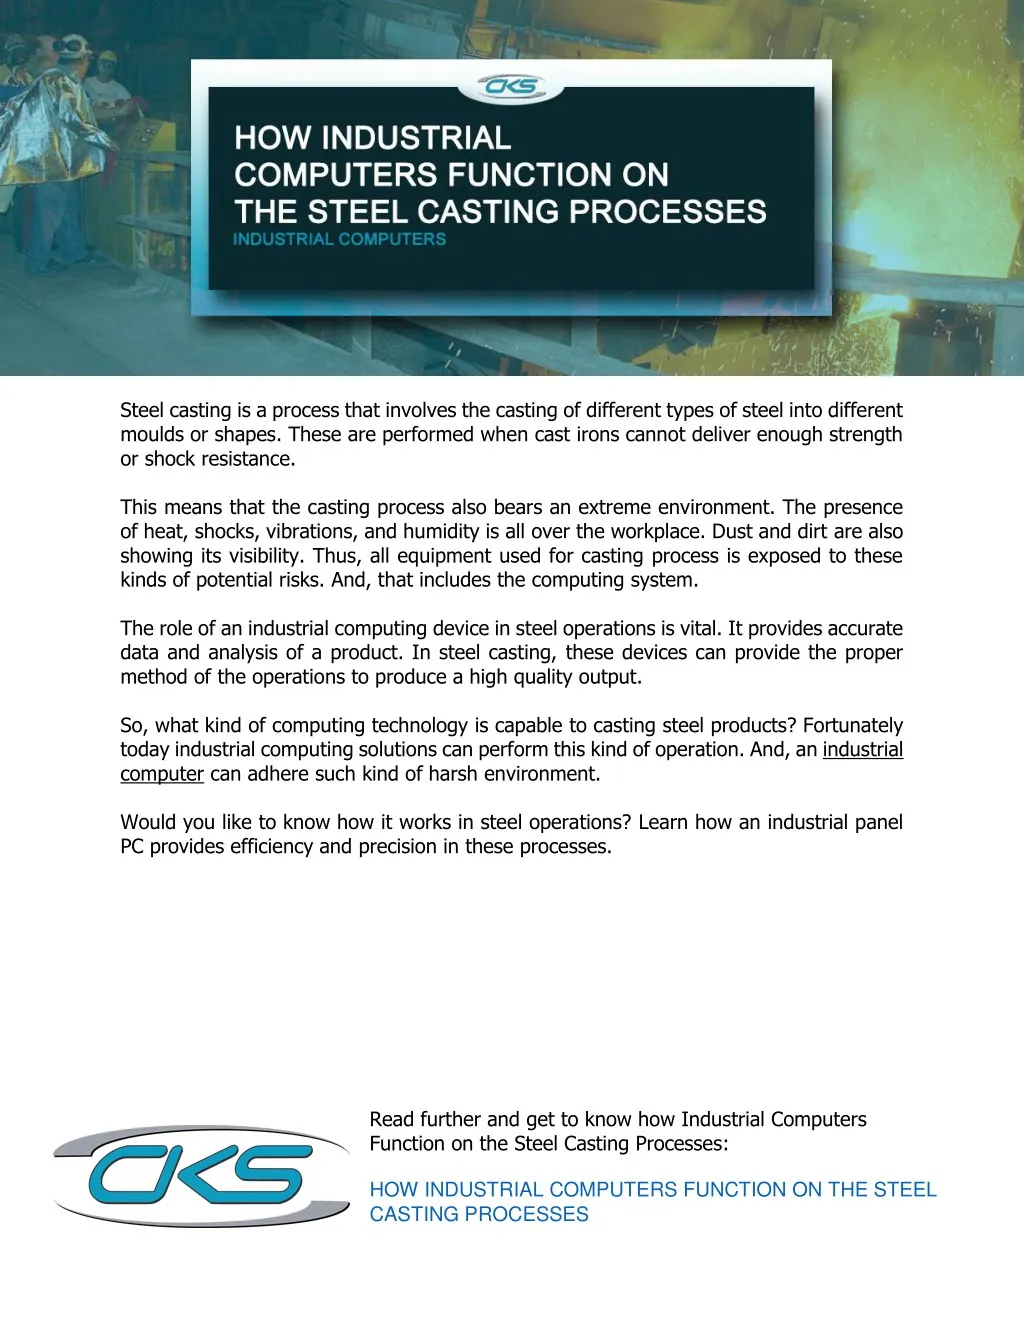 steel casting is a process that involves